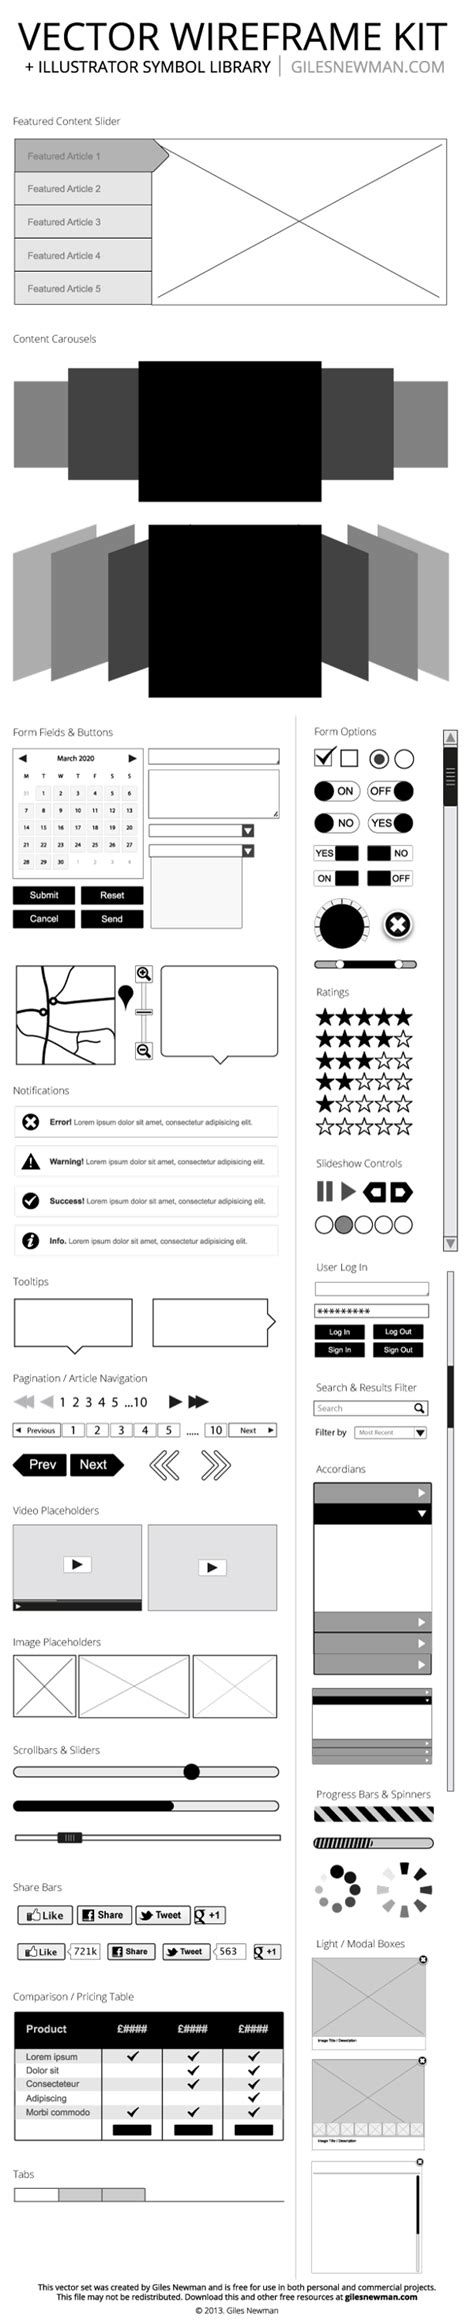 Vector Wireframe Kit & Symbol Library by Giles Newman, via Behance | Wireframe kit, Wireframe ...